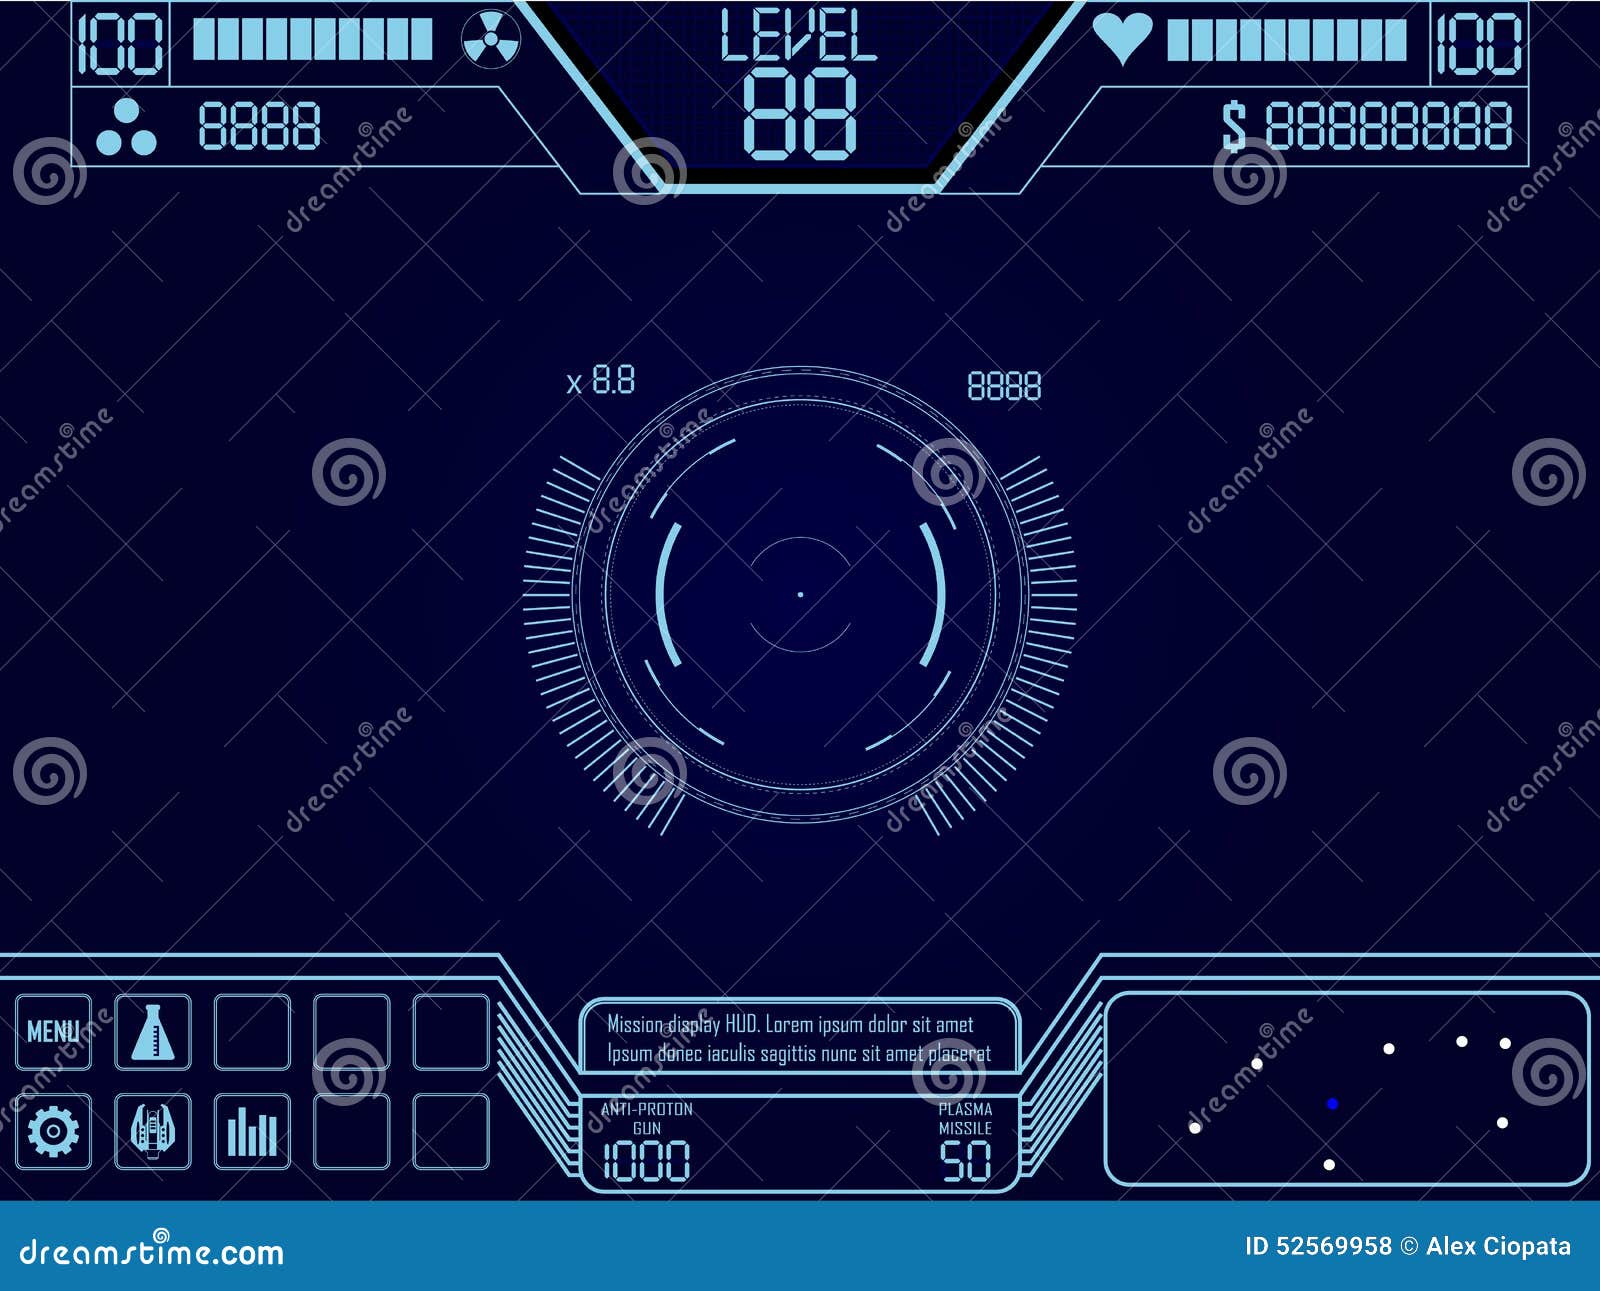 space shooter game ui